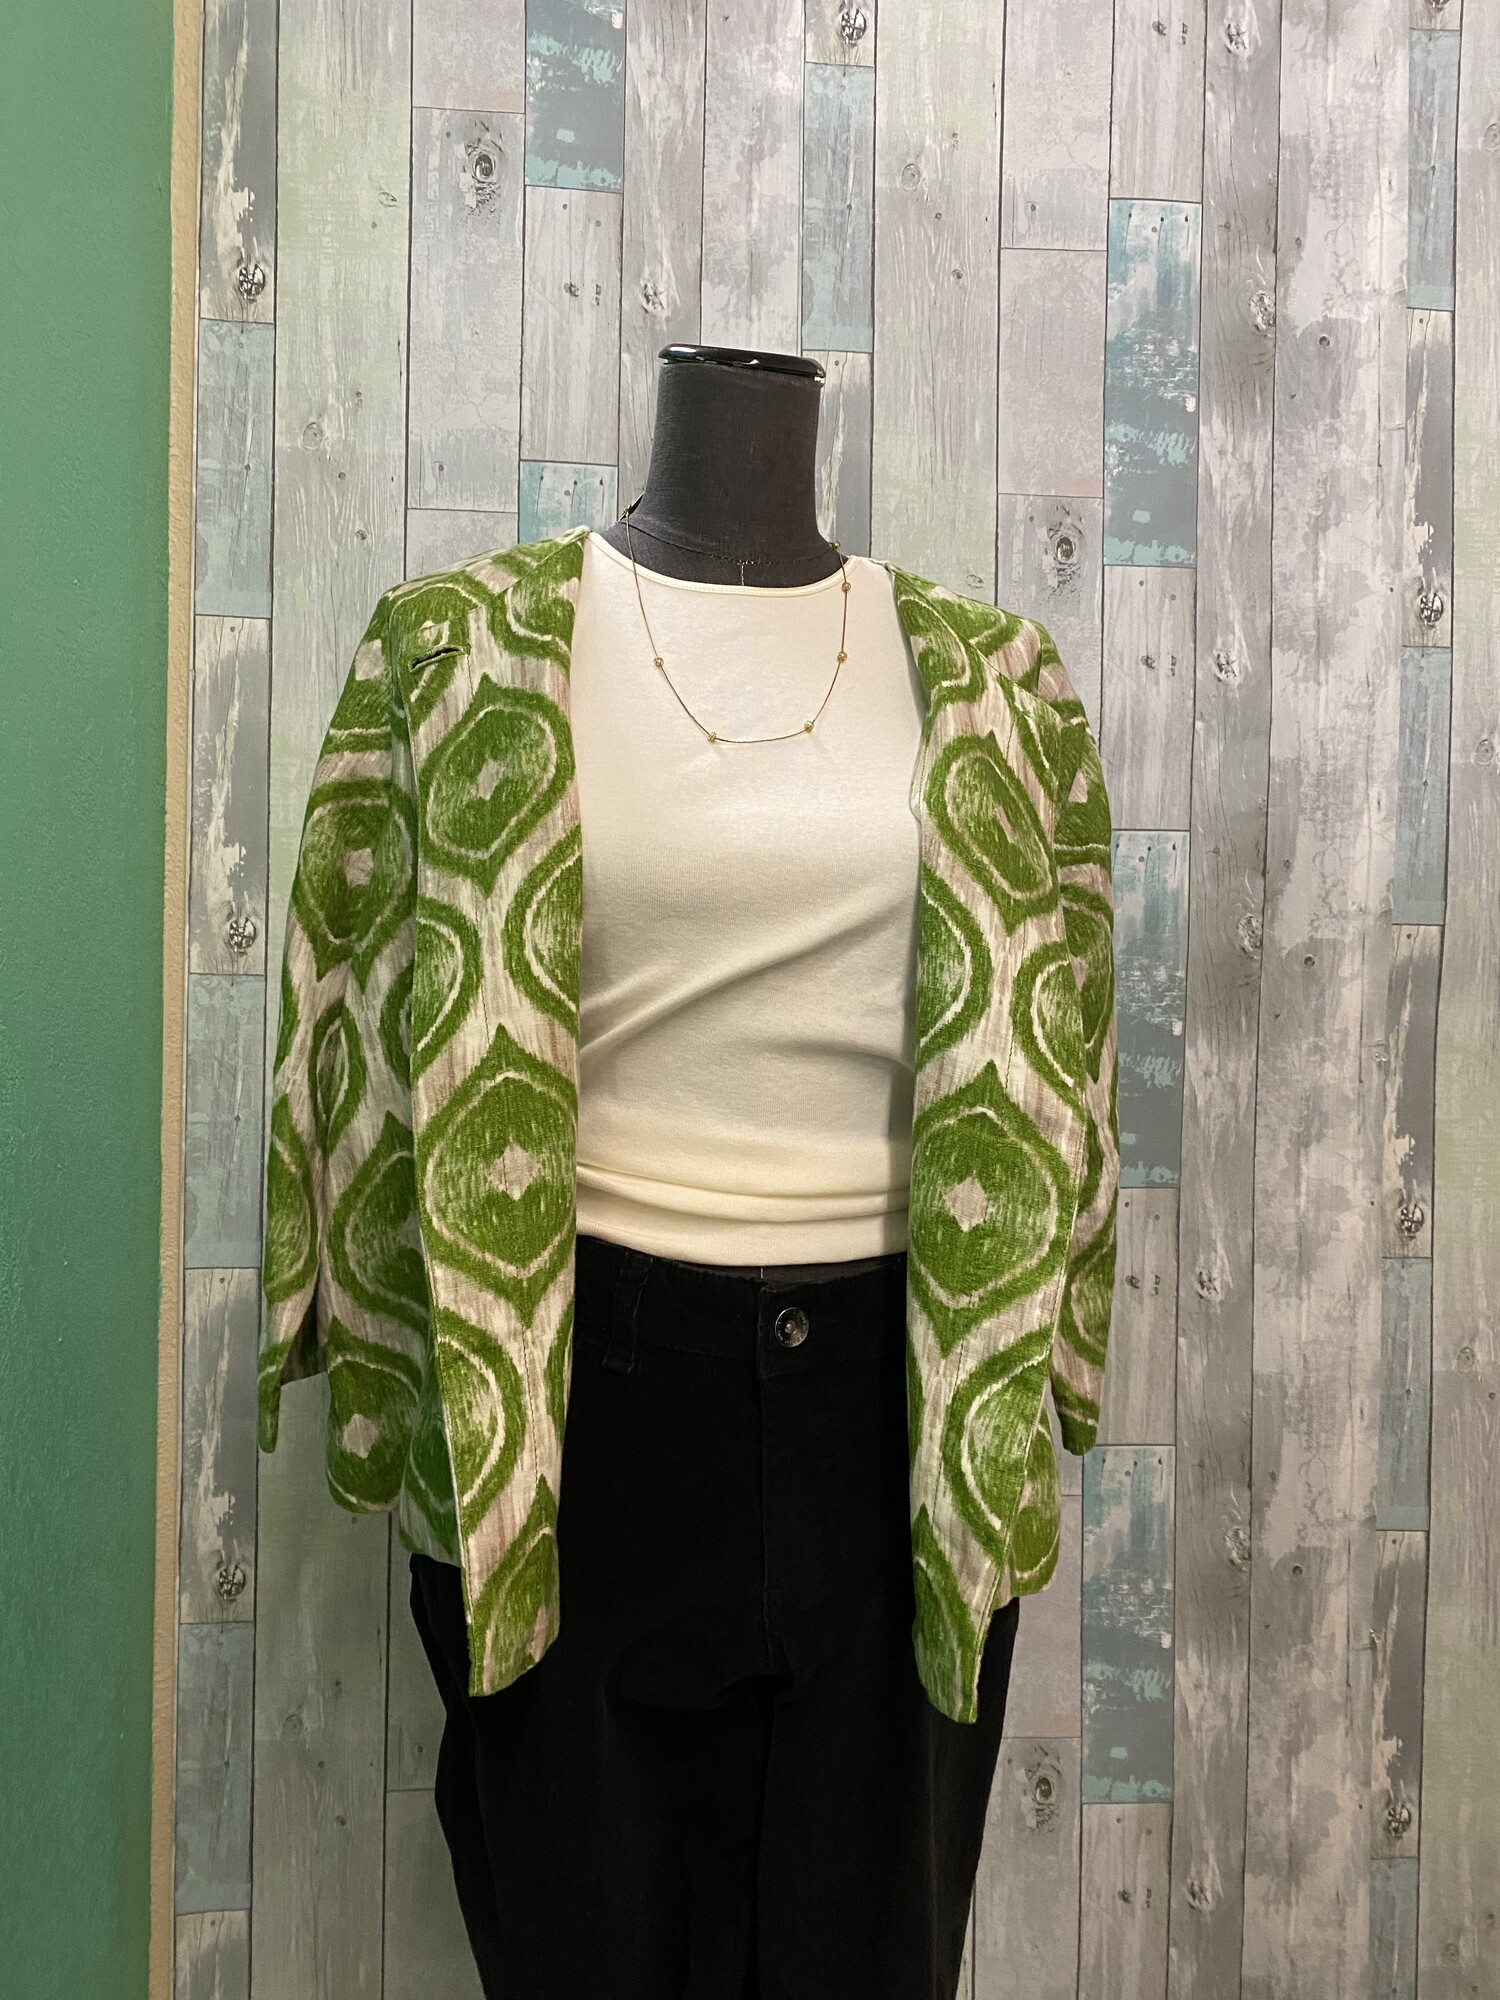 Chicos Blazer,
Green and Tan
Size: Medium

This piece is gorgeous! Fantastic for a night out or a day in the office!